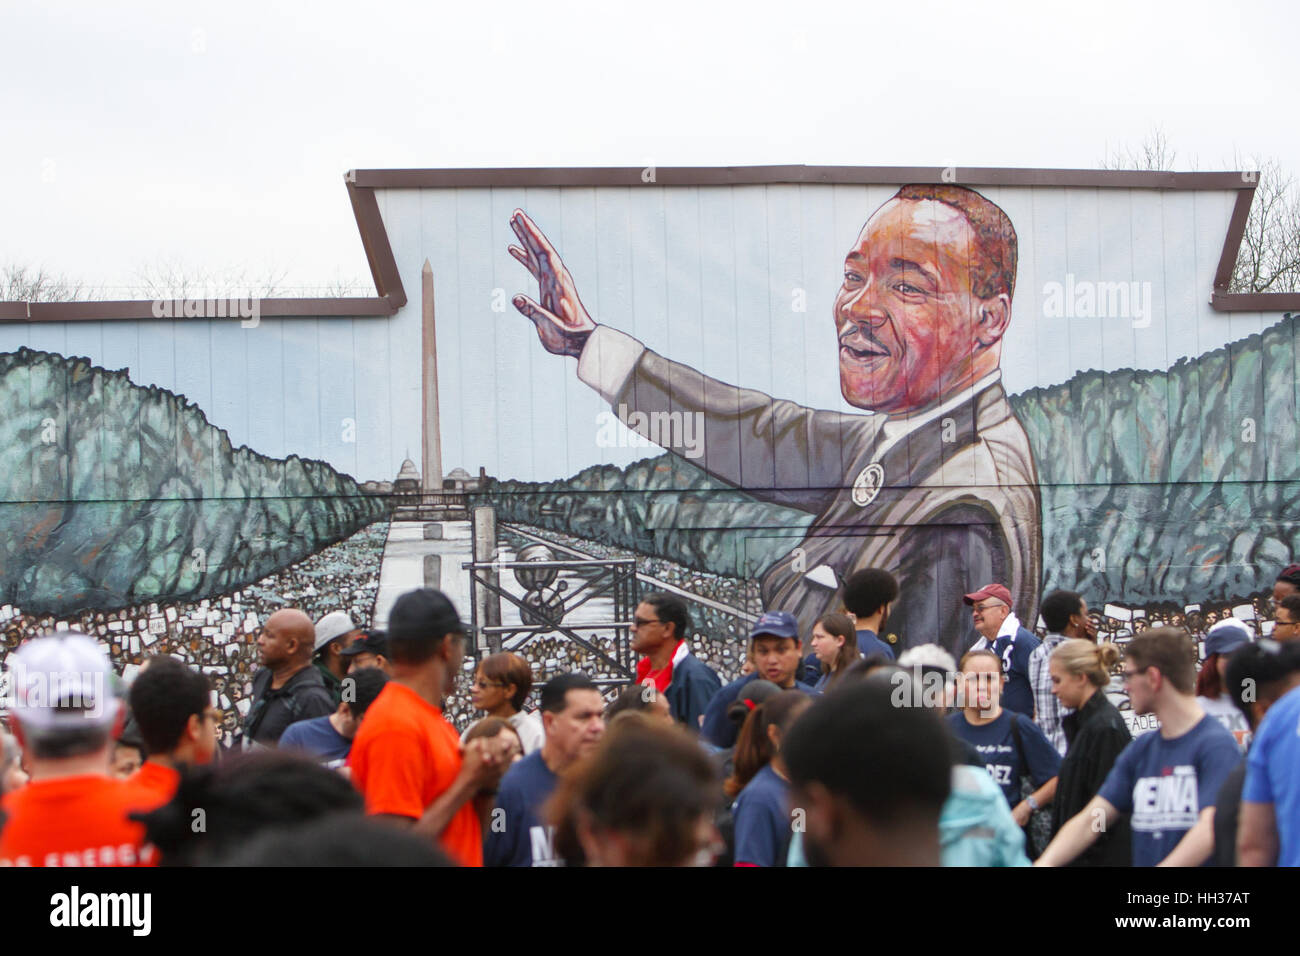 San Antonio, USA. 16th January, 2017. Marchers stand in front of a mural of Martin Luther King, Jr. before the annual Martin Luther King Jr. march in San Antonio, Texas. Several thousand people attended the city's 30th anniversary march celebrating U.S. civil rights leader Martin Luther King, Jr. Credit: Michael Silver/Alamy Live News Stock Photo